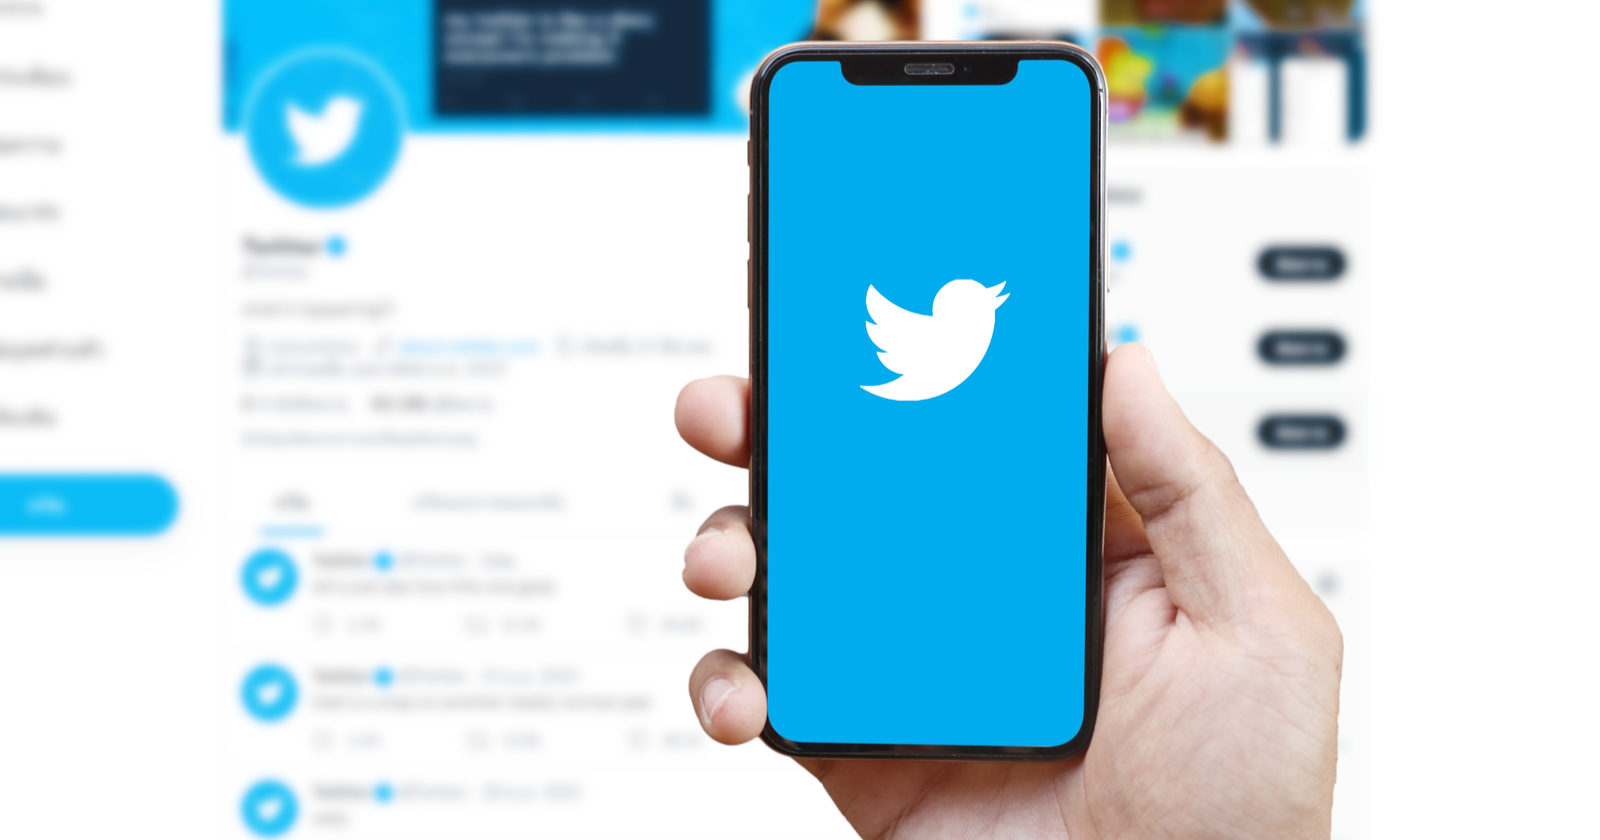 Twitter Tests More Visible Alt Text